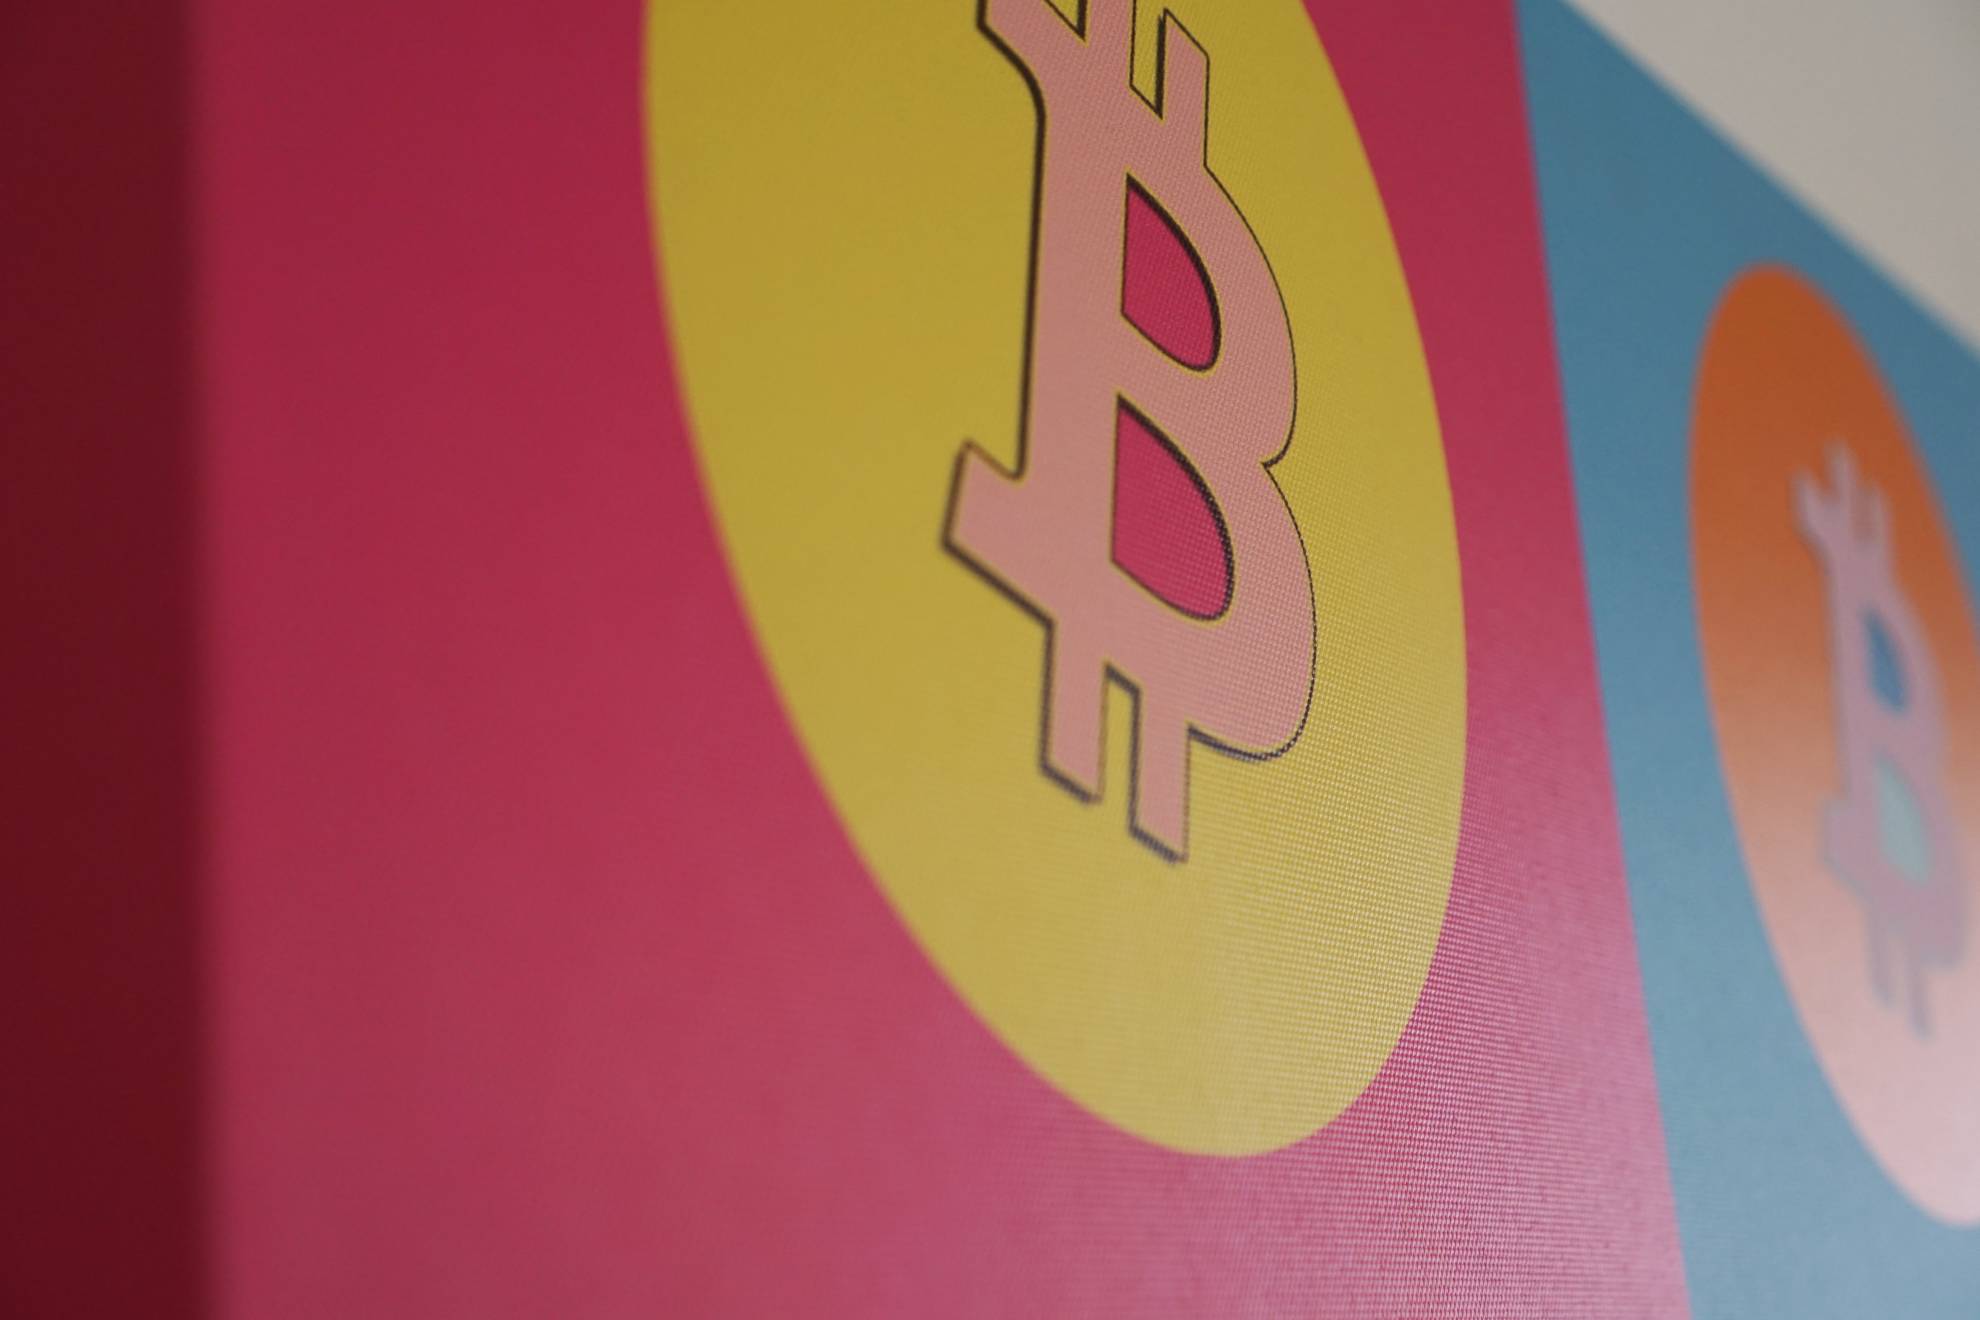 ANDY WARHOL BITCOIN CANVAS – Decentralized Gear